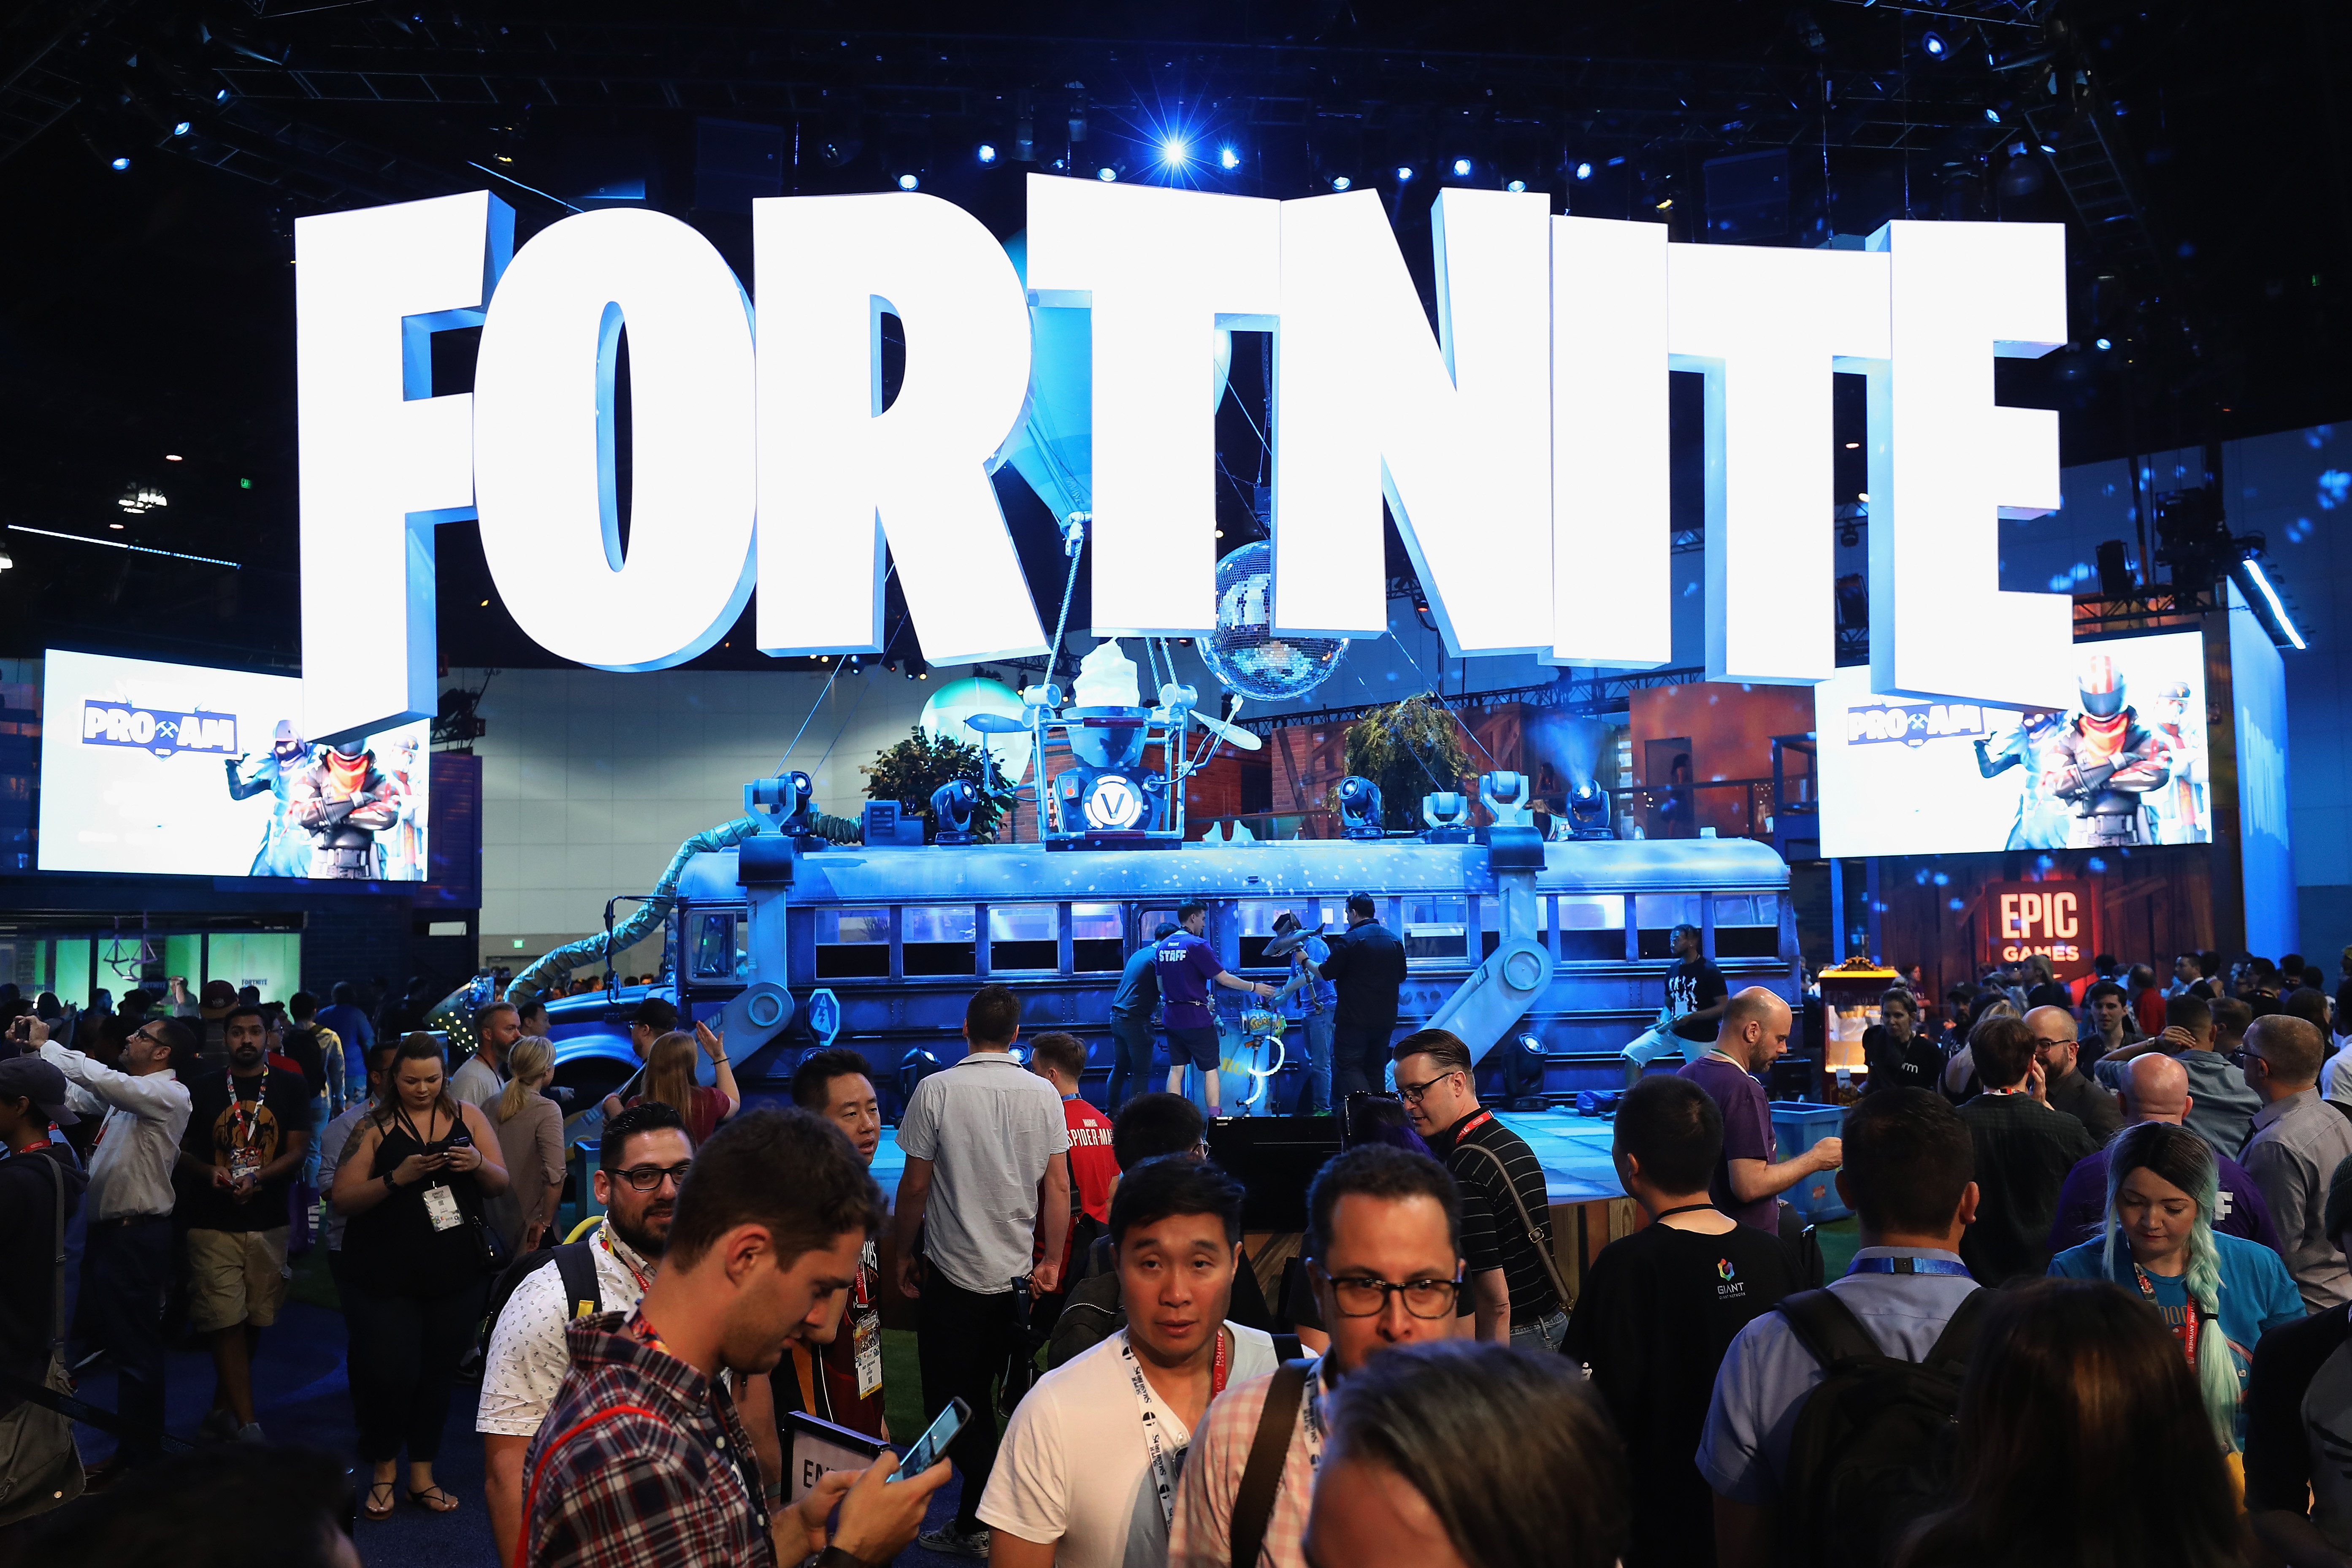 Fortnite Summer Skirmish: Epic Games announces first official